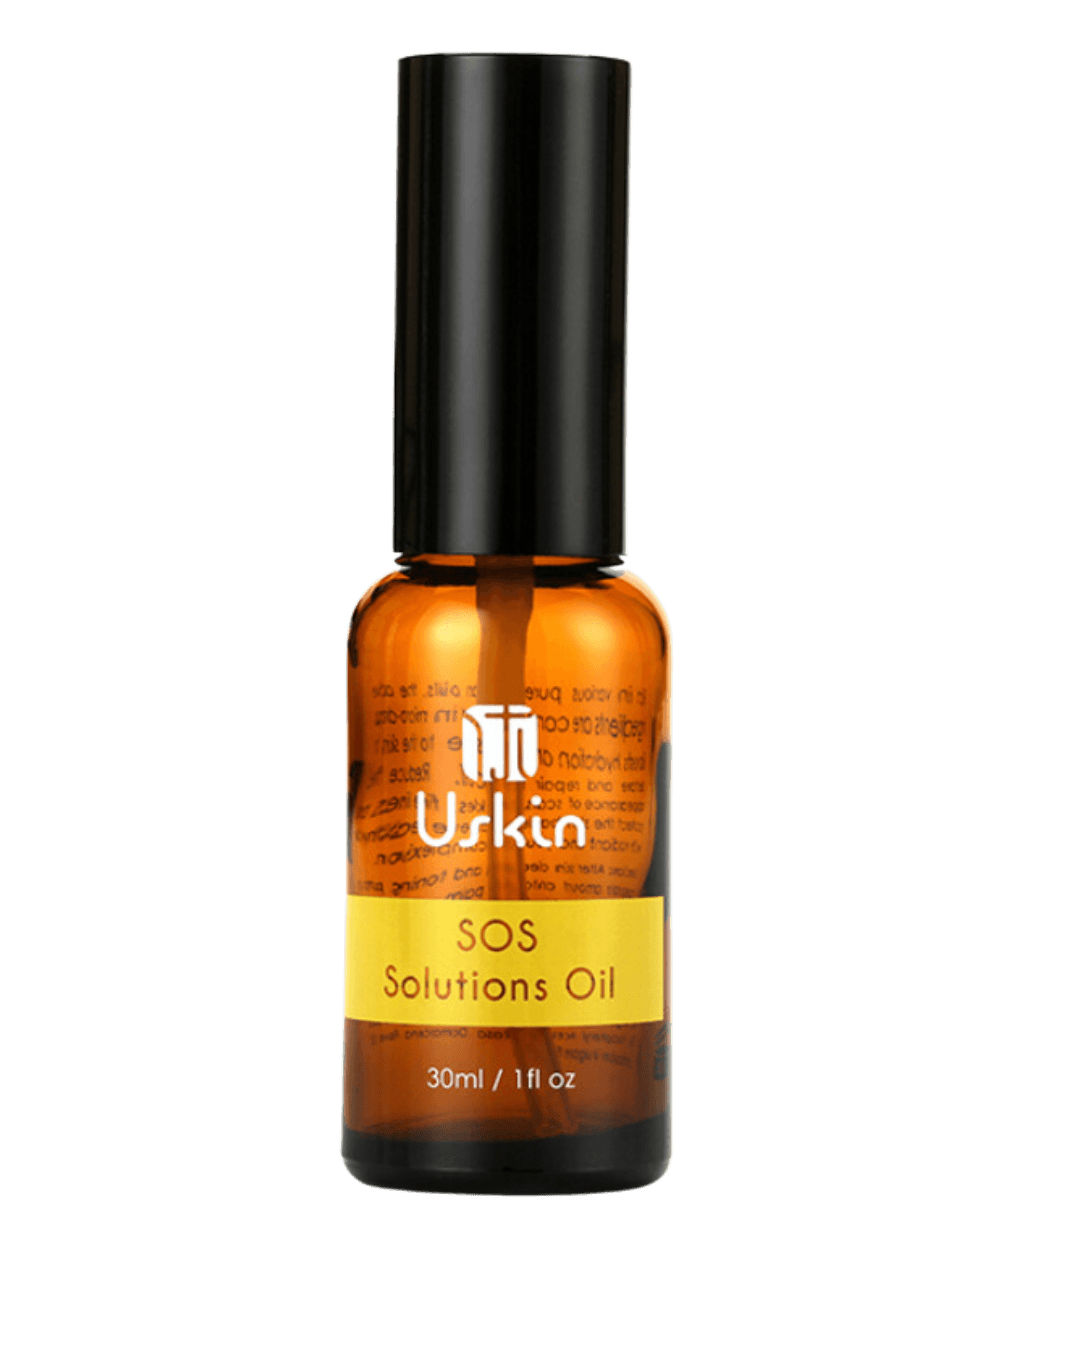 Daily Vanity Beauty Awards 2024 Best Skincare Uskin SOS Solutions Oil Voted By Beauty Experts